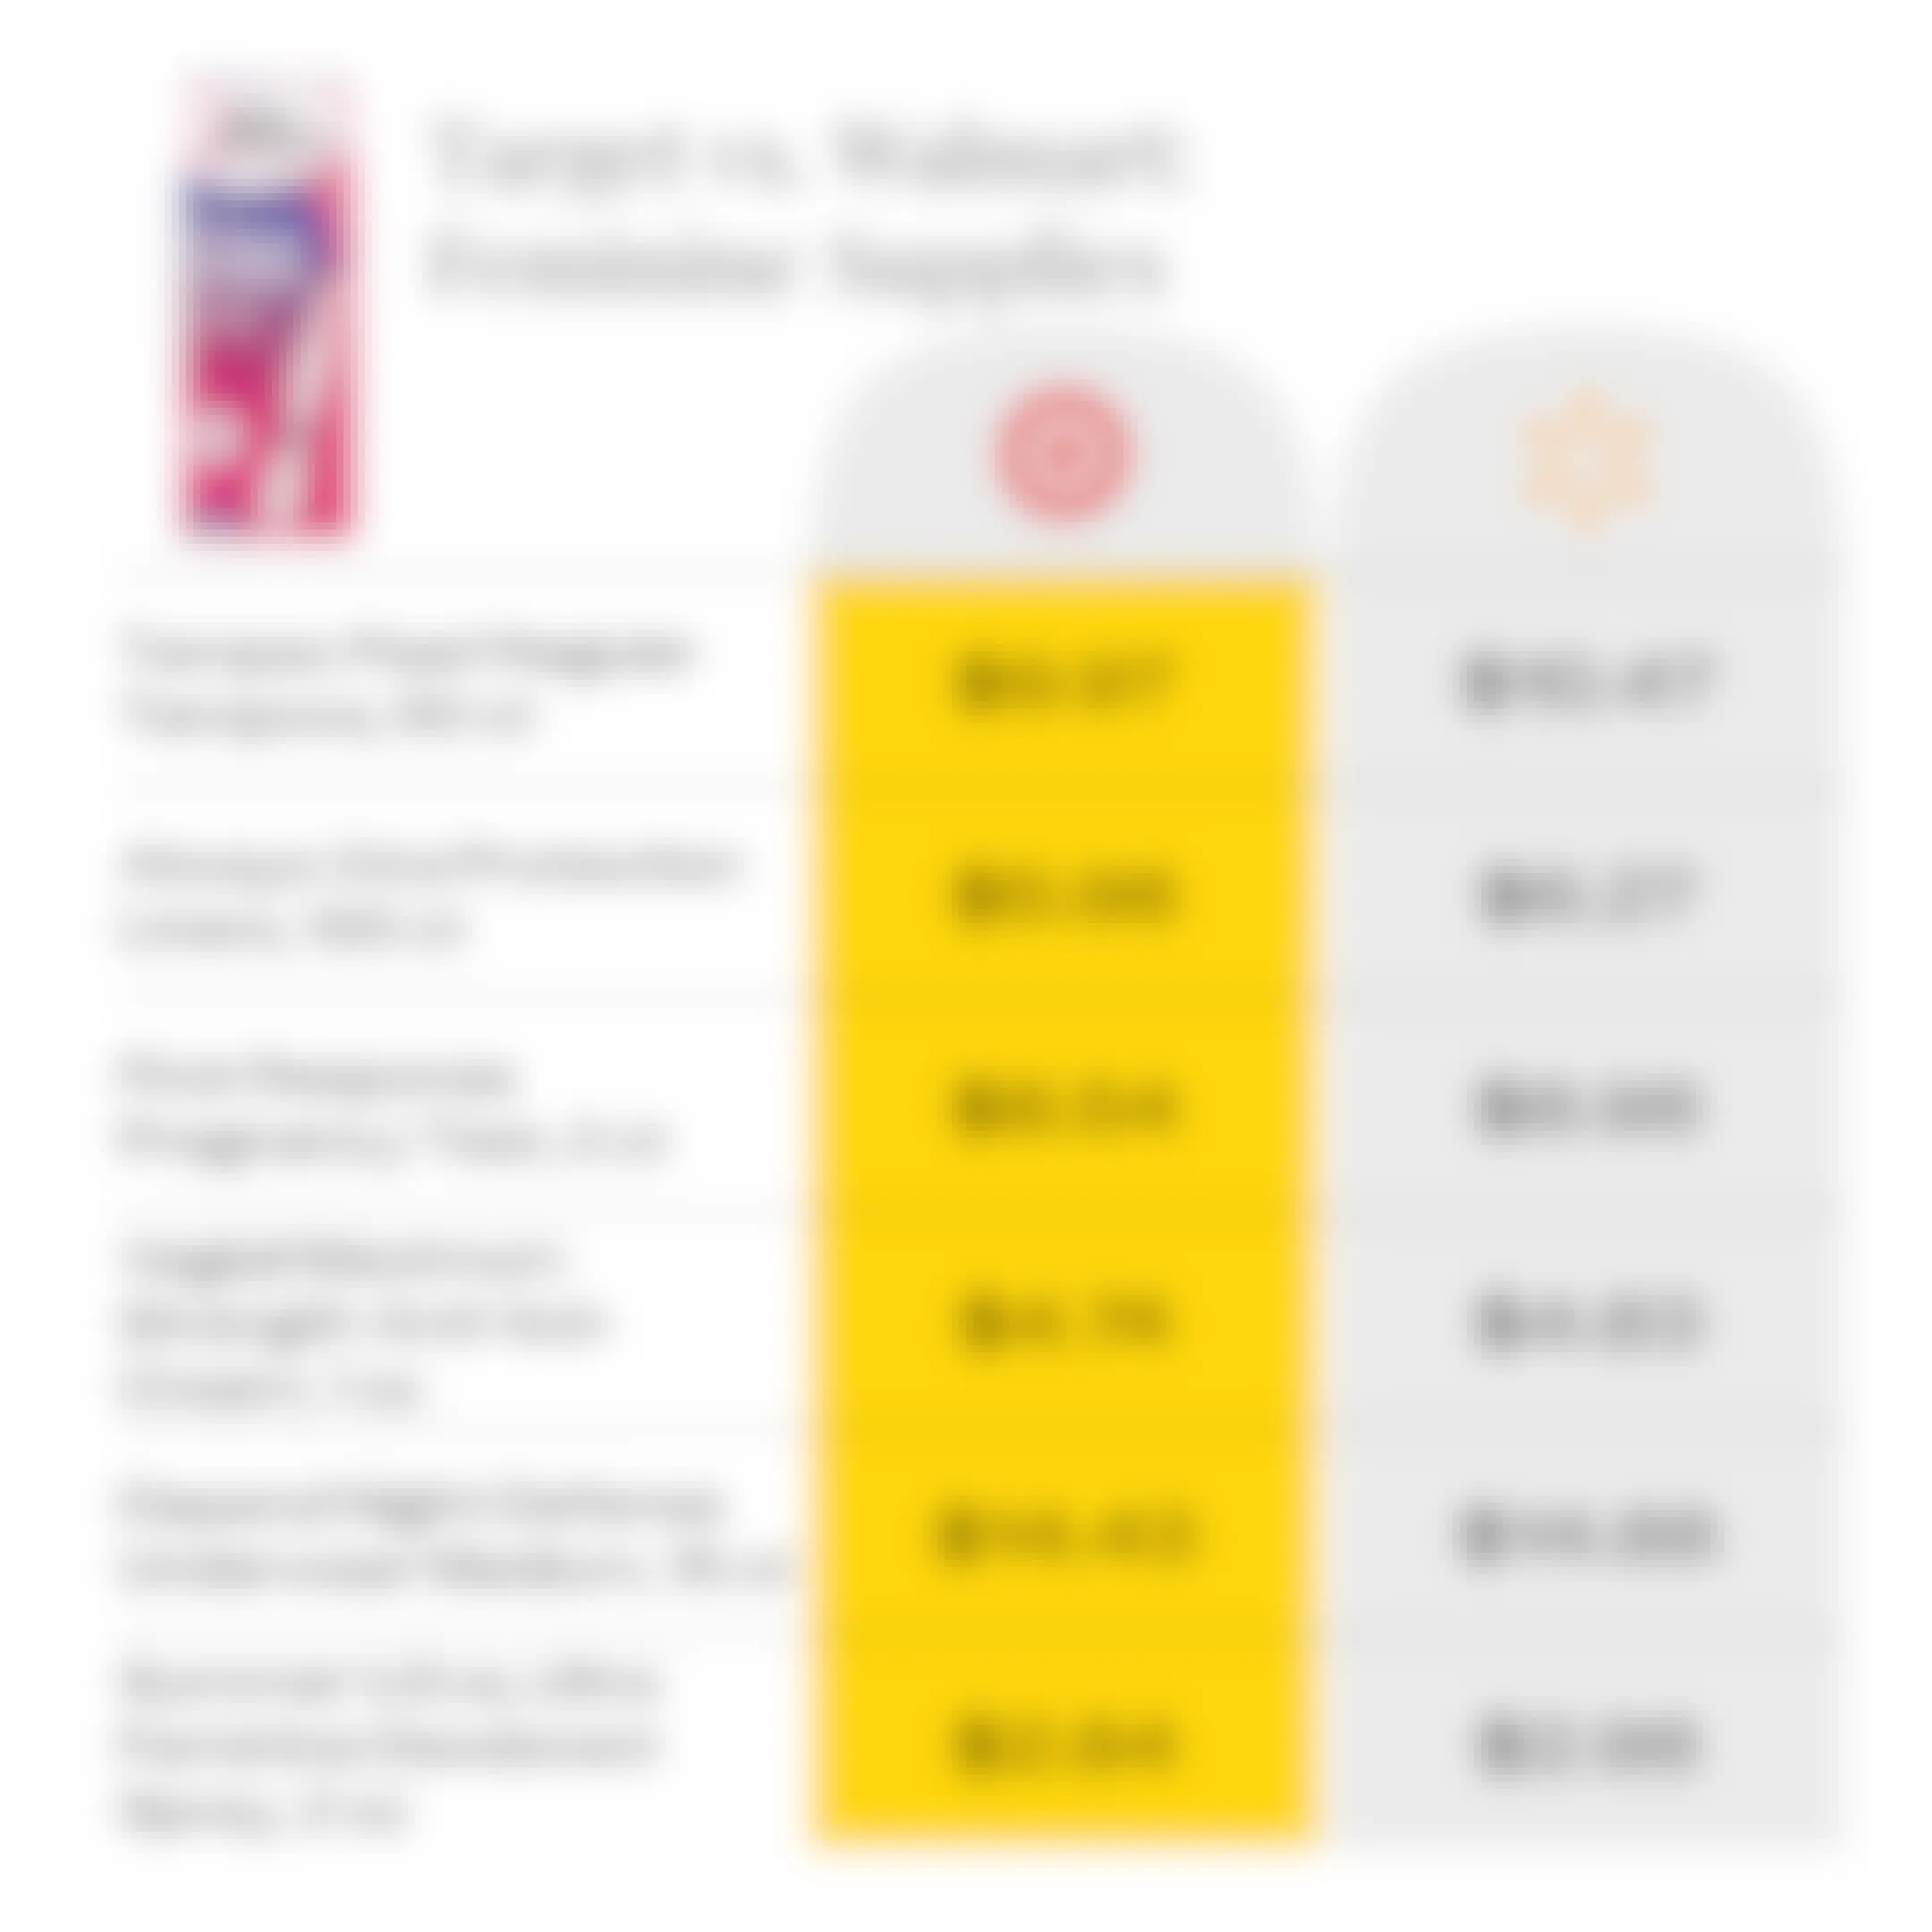 price comparison for feminine supplies at Target and Walmart